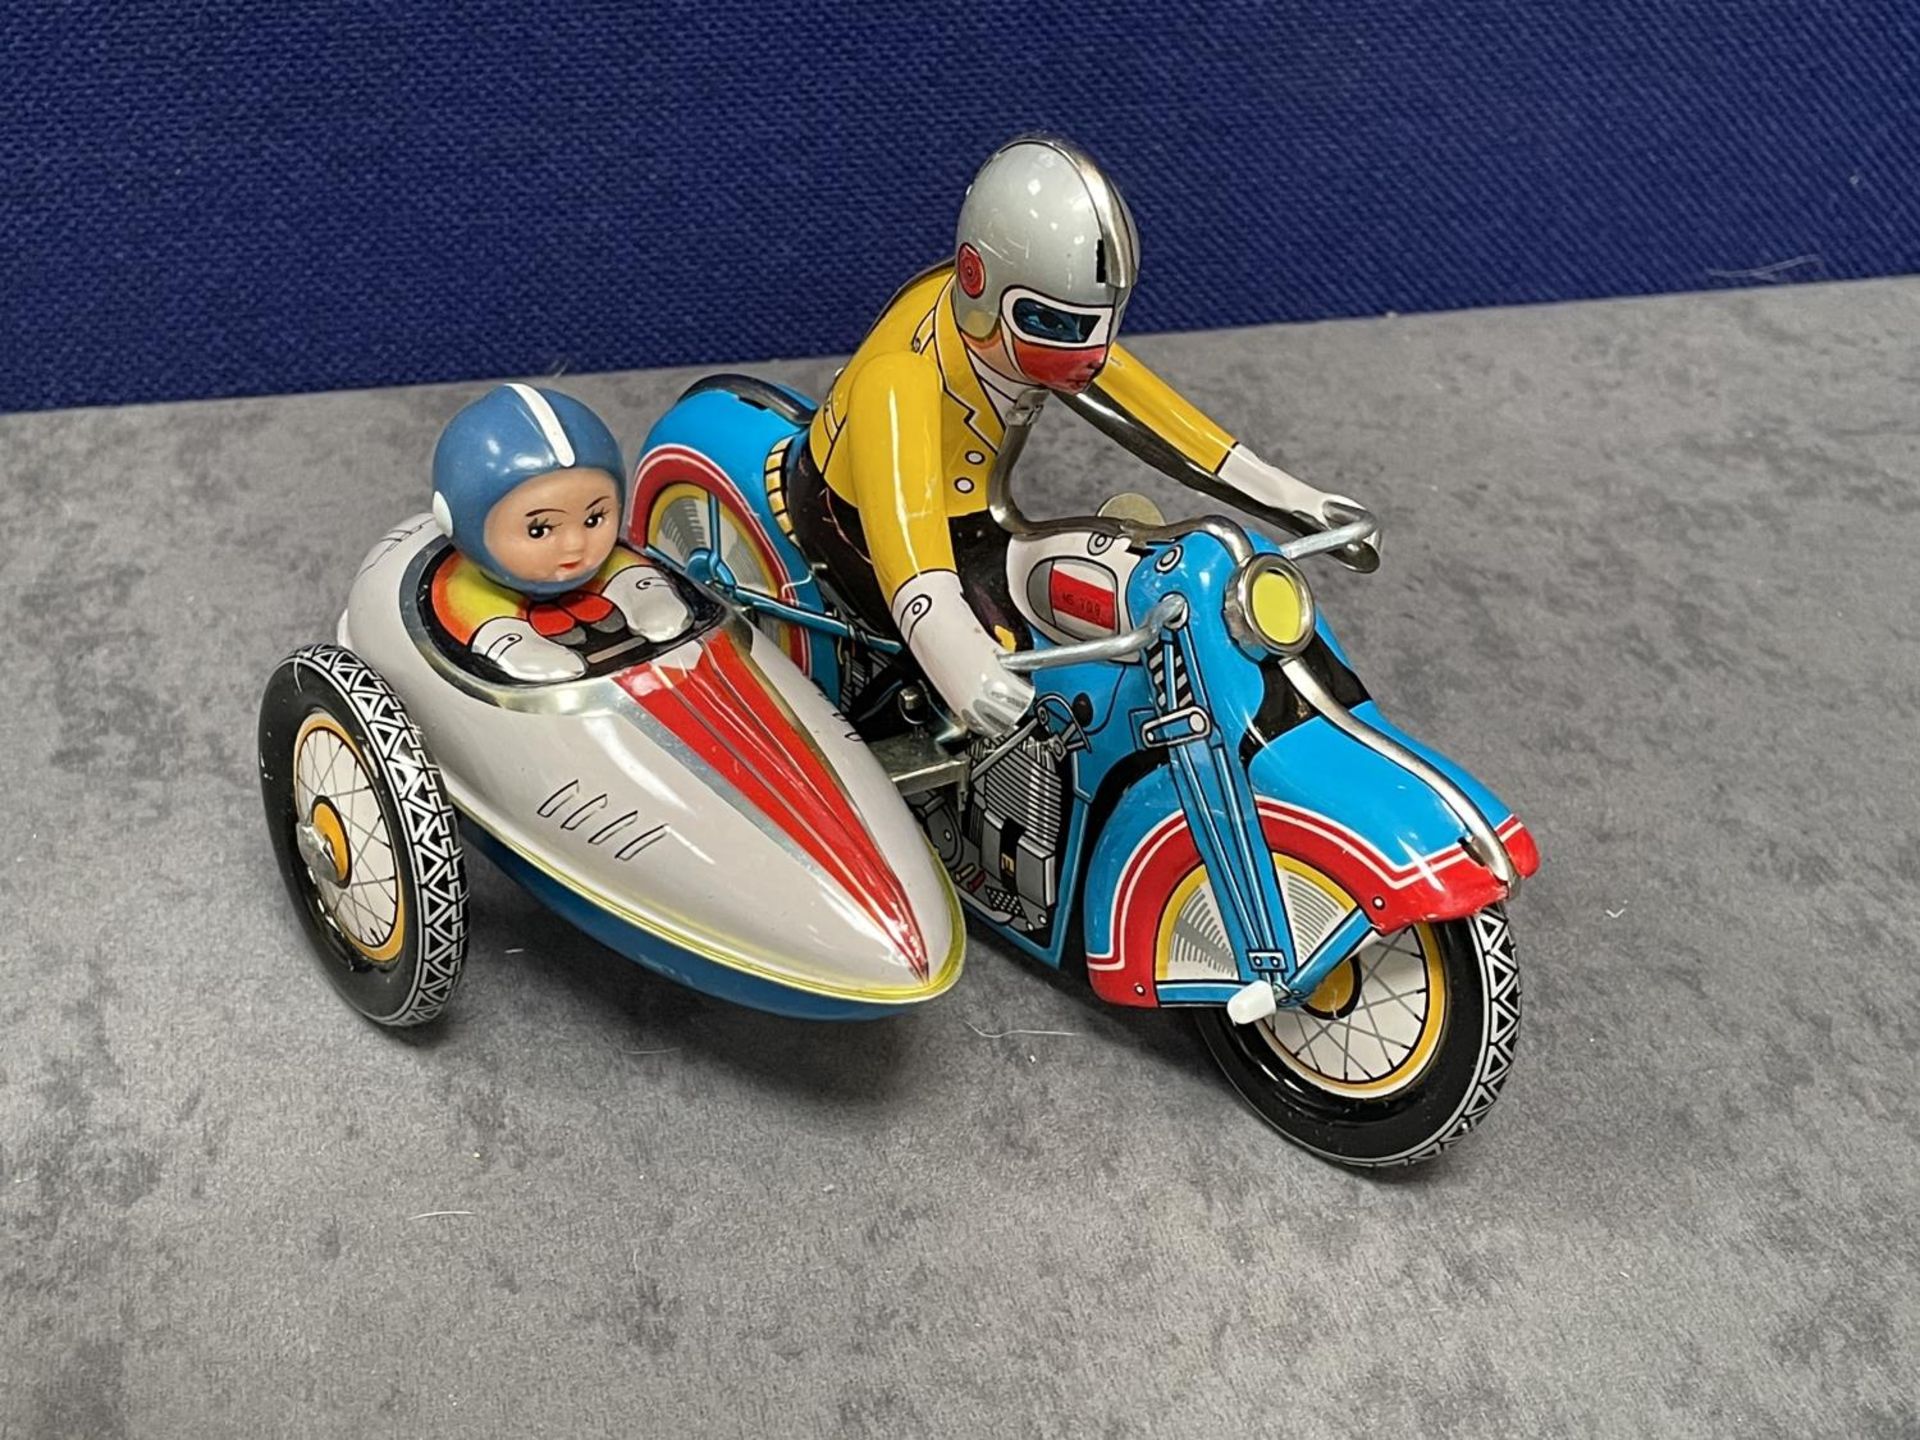 Clockwork Tinplate Motorcycle With Sidecar With Instruction Sheet In Box - Image 2 of 4